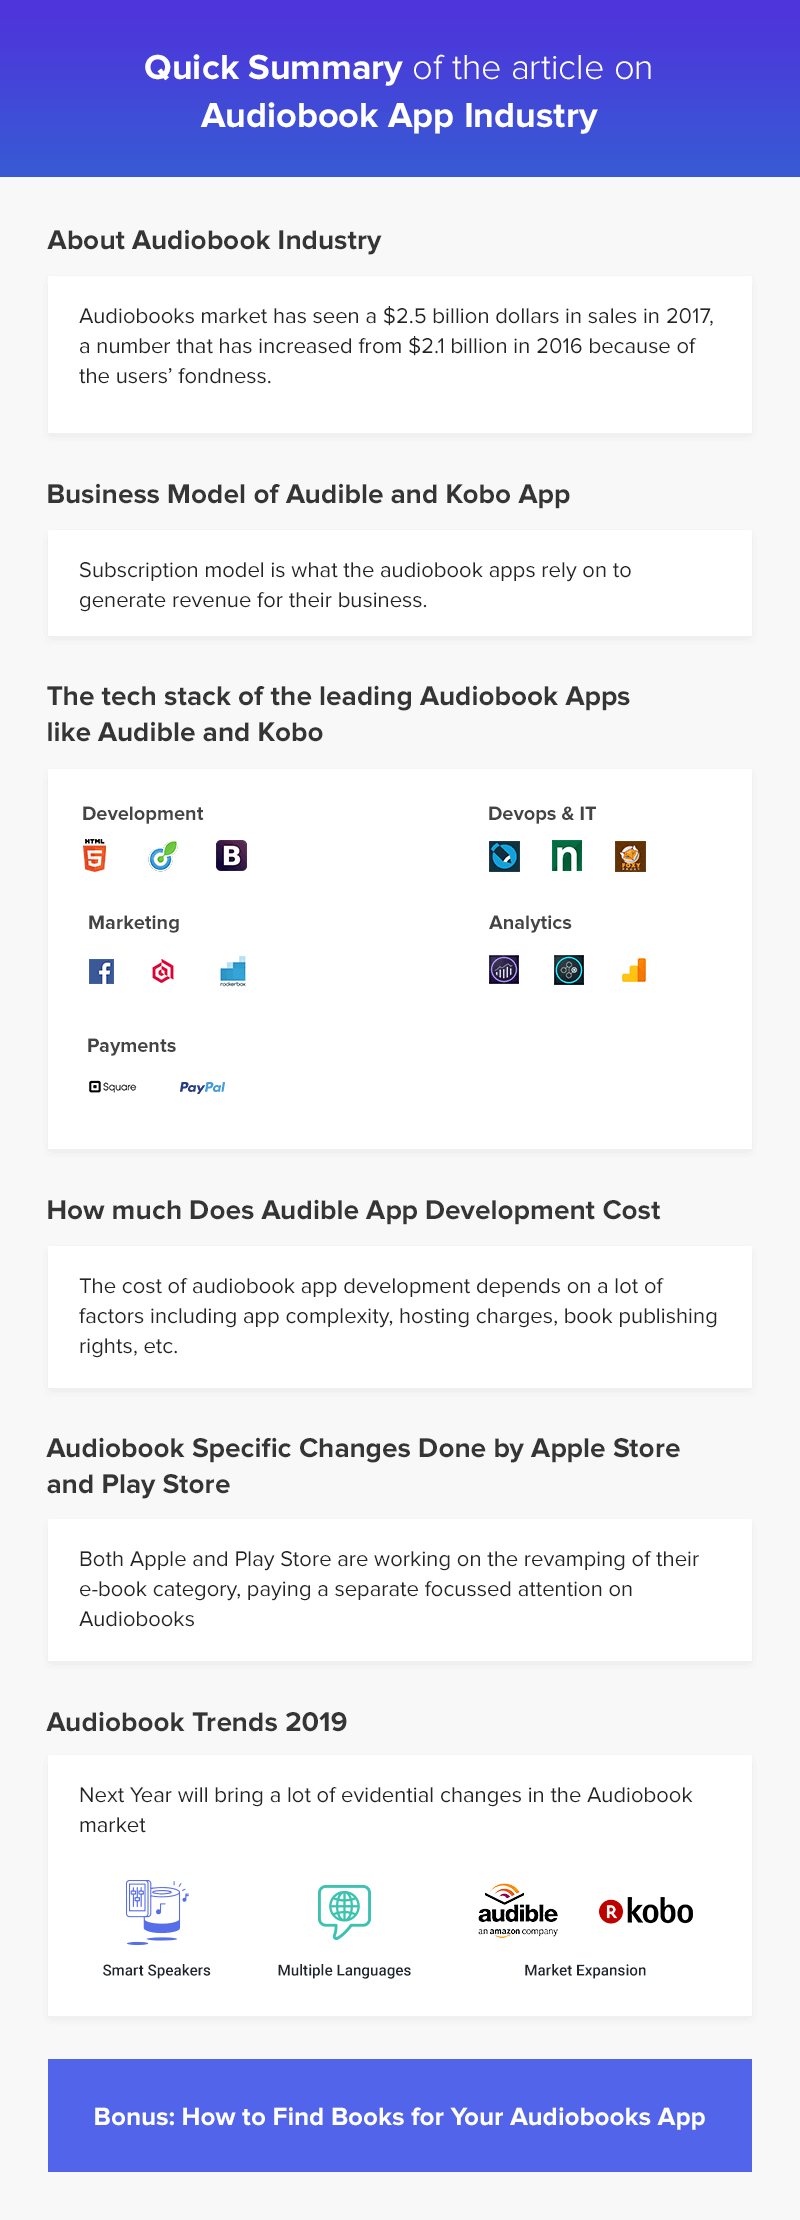 Quick Summary of the Article on Audiobook App Industry